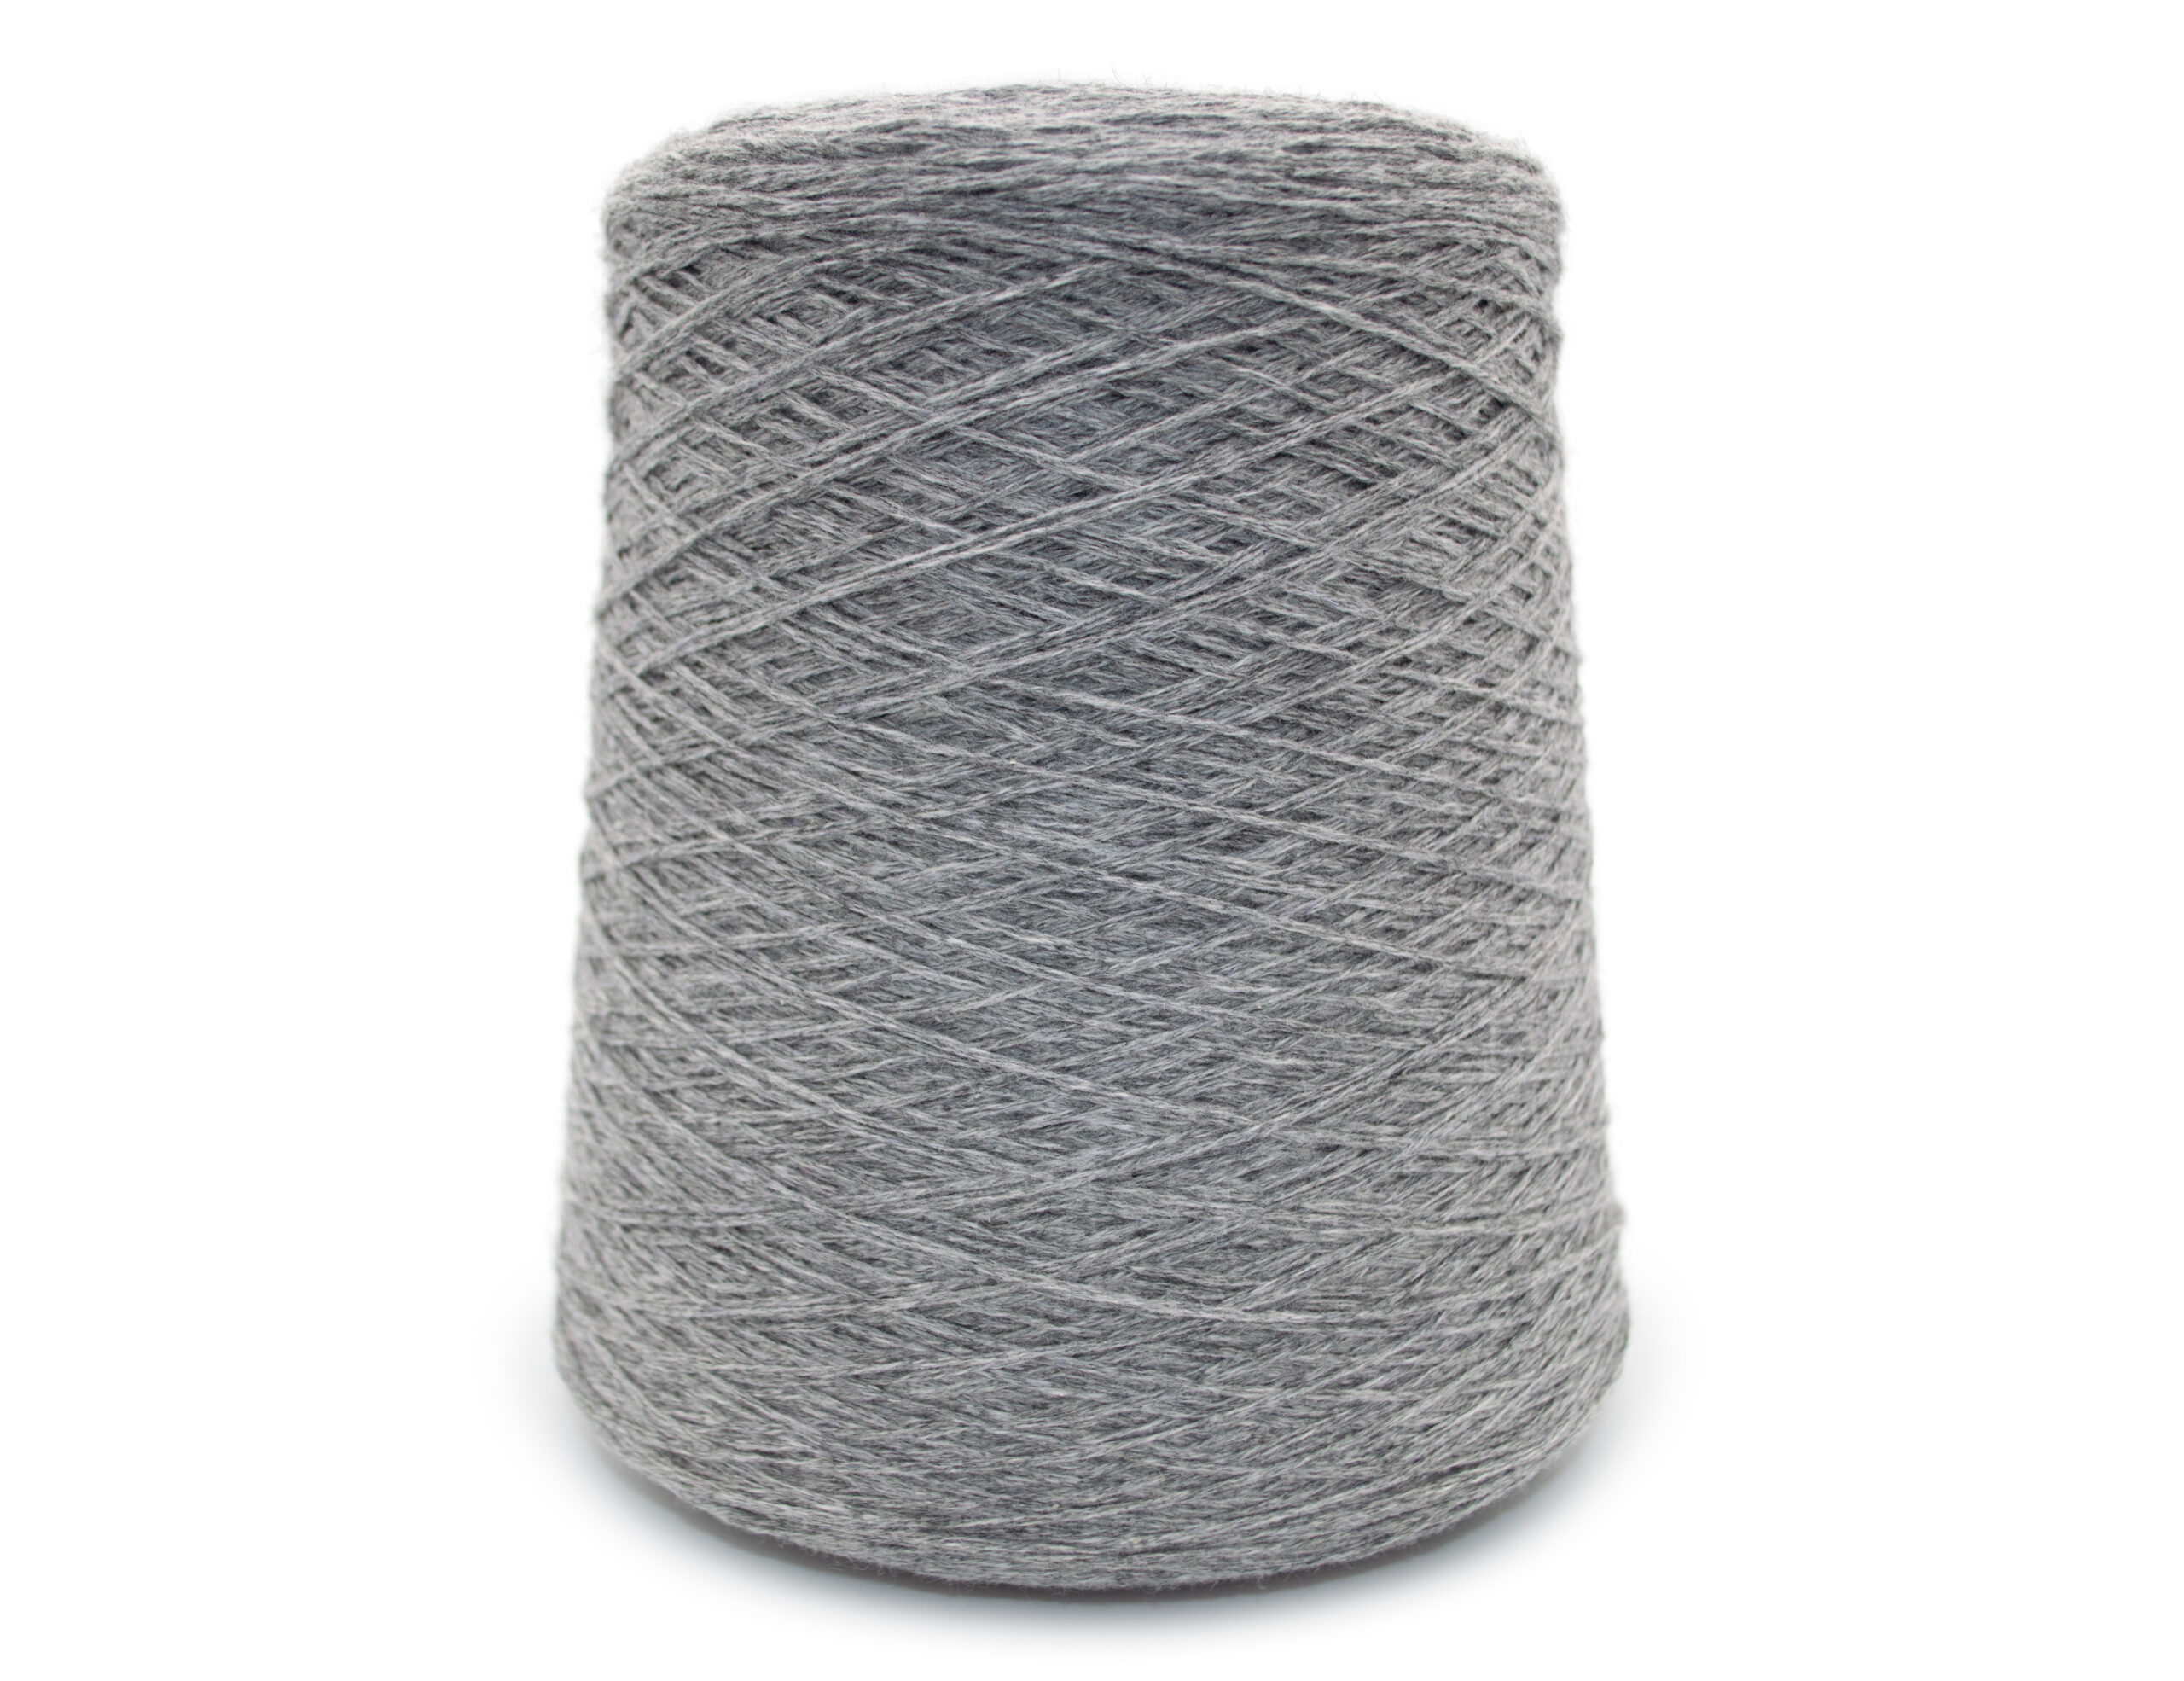 100% Cashmere Yarn on Cone, Pure Italian Cashmere Yarn, Lace Weight Yarn  for Knitting, Weaving and Crochet, per 100g -  Israel